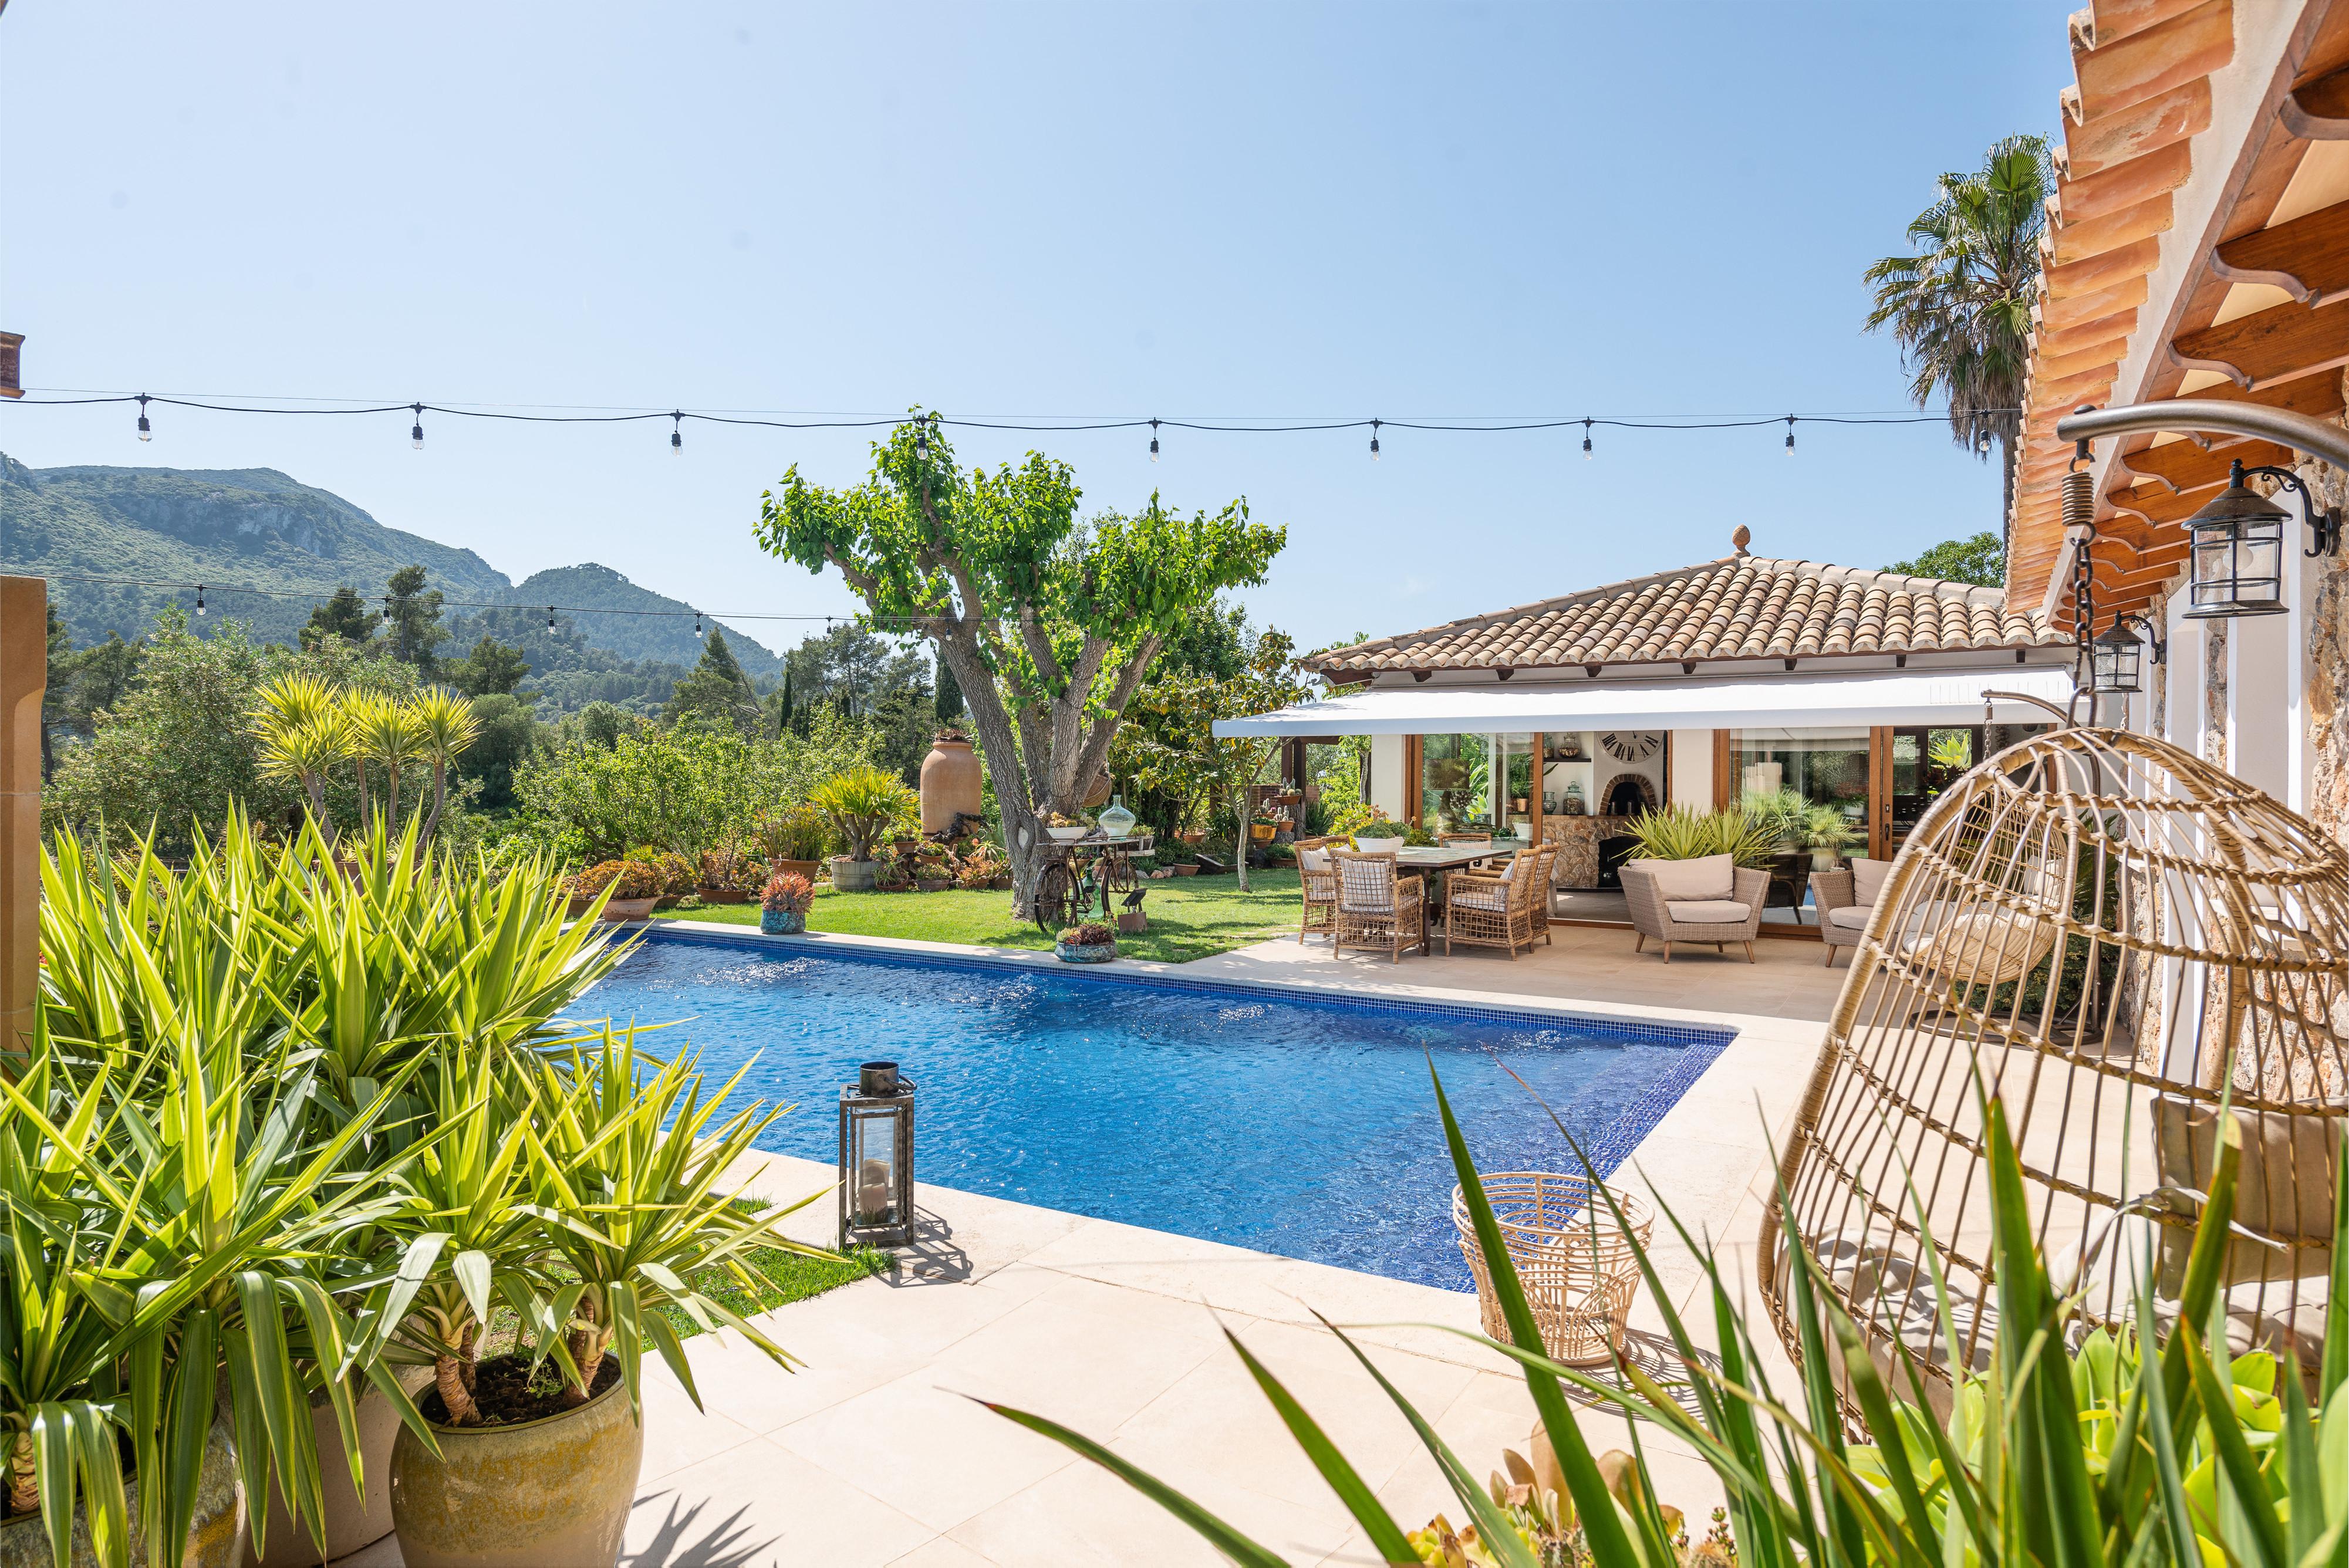 Property Image 1 - CAN SION - Villa with private pool in Esporlas. Free WiFi